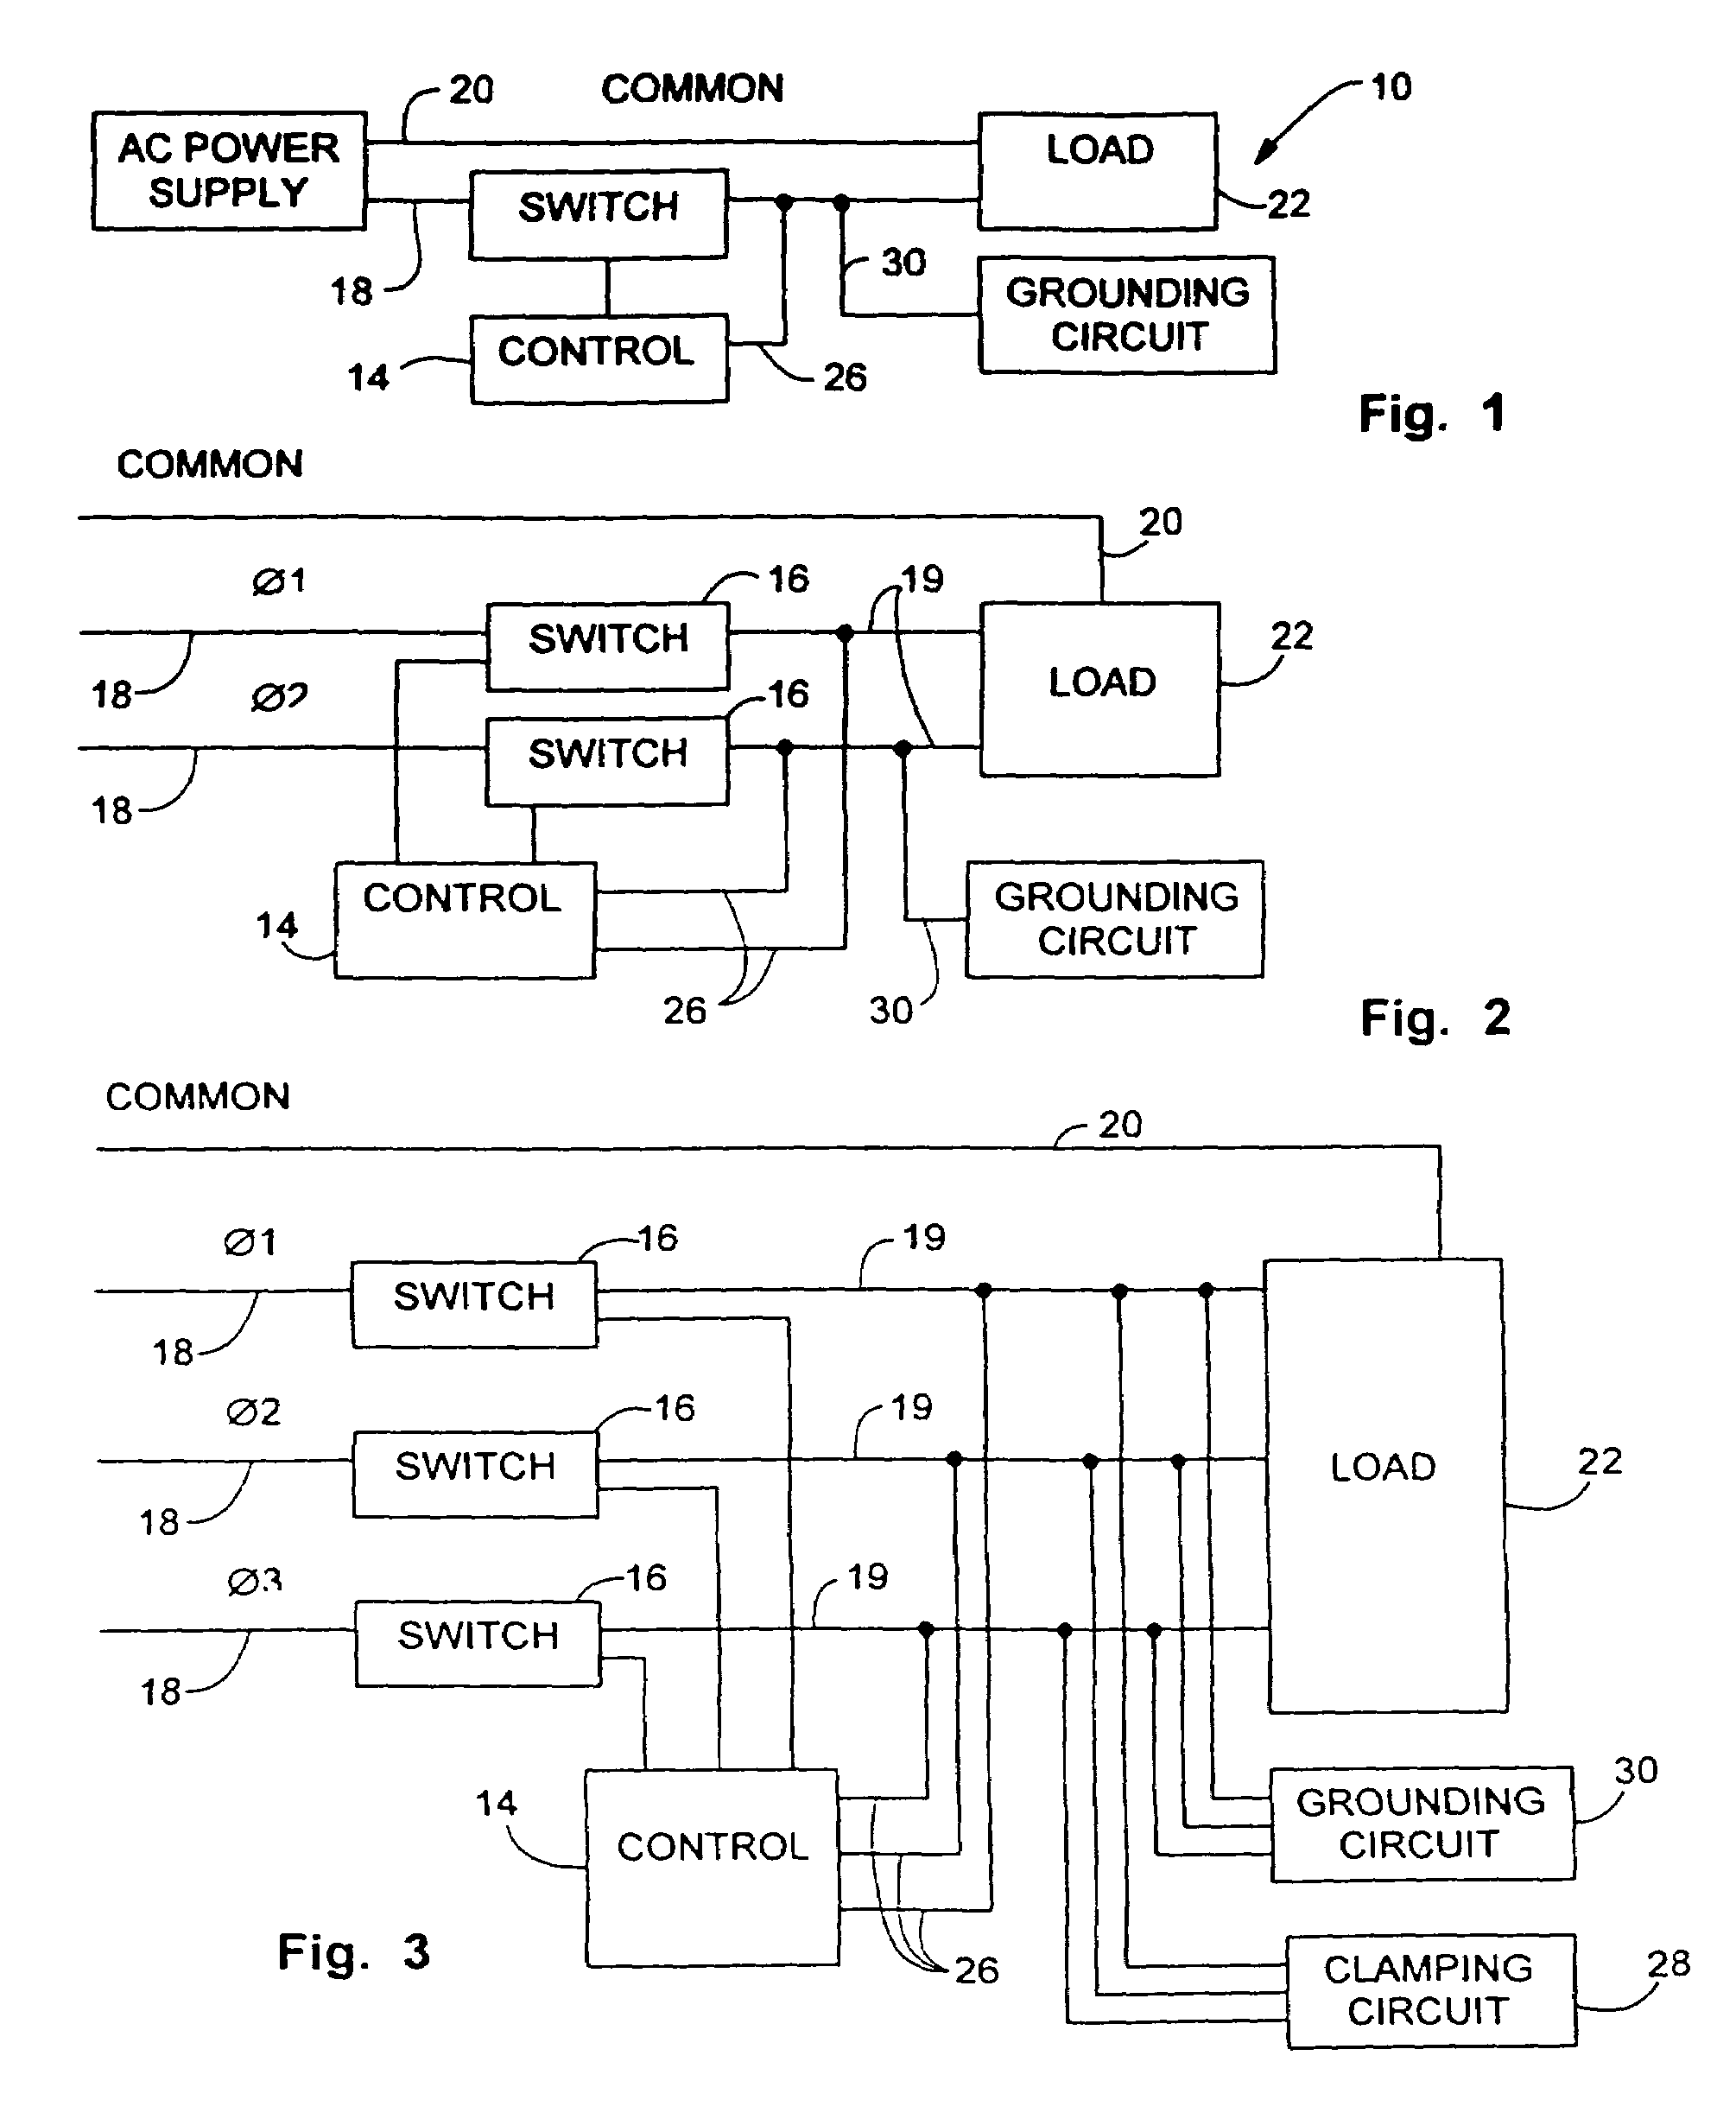 Electrical power conservation apparatus and method